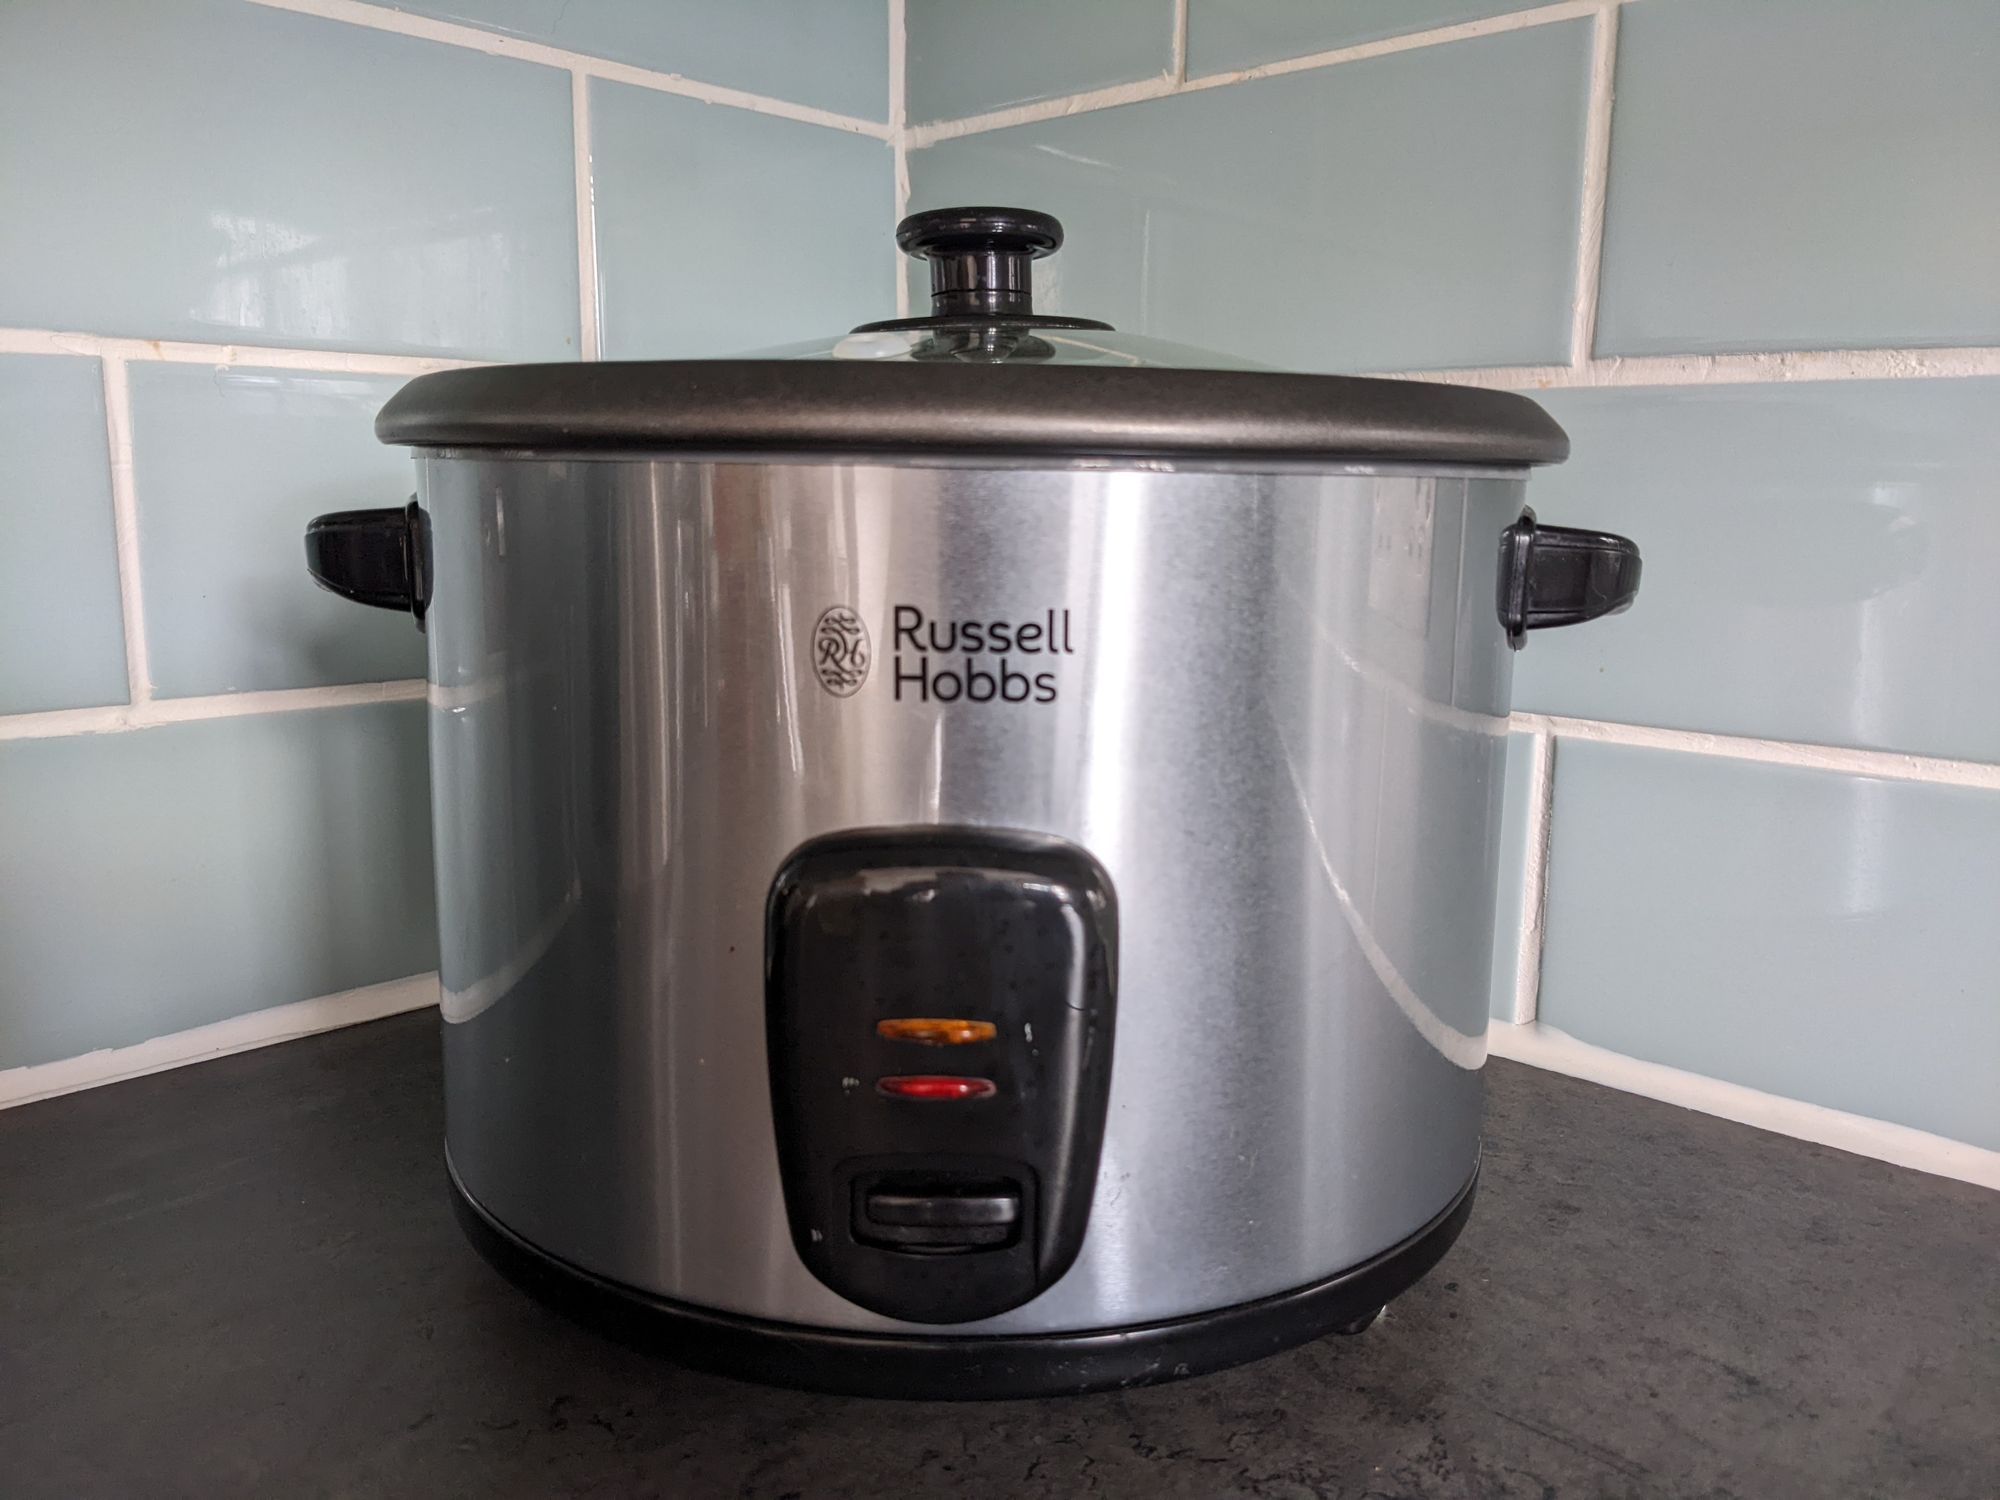 A stainless steel Russell Hobbs rice cooker.